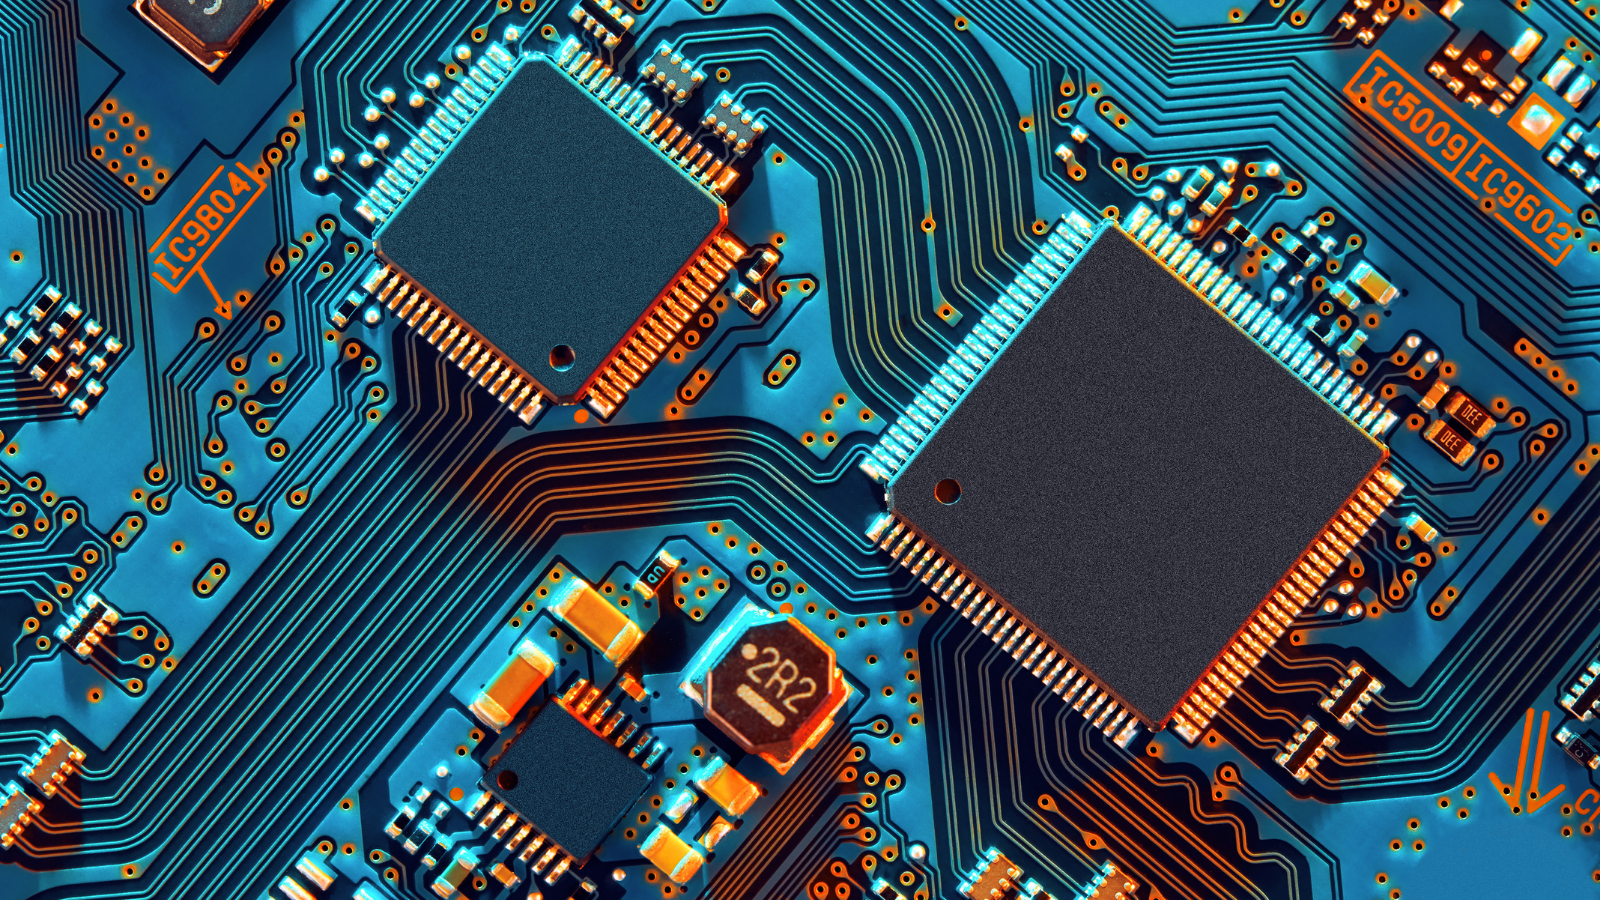 Micro chips on a circuit board.